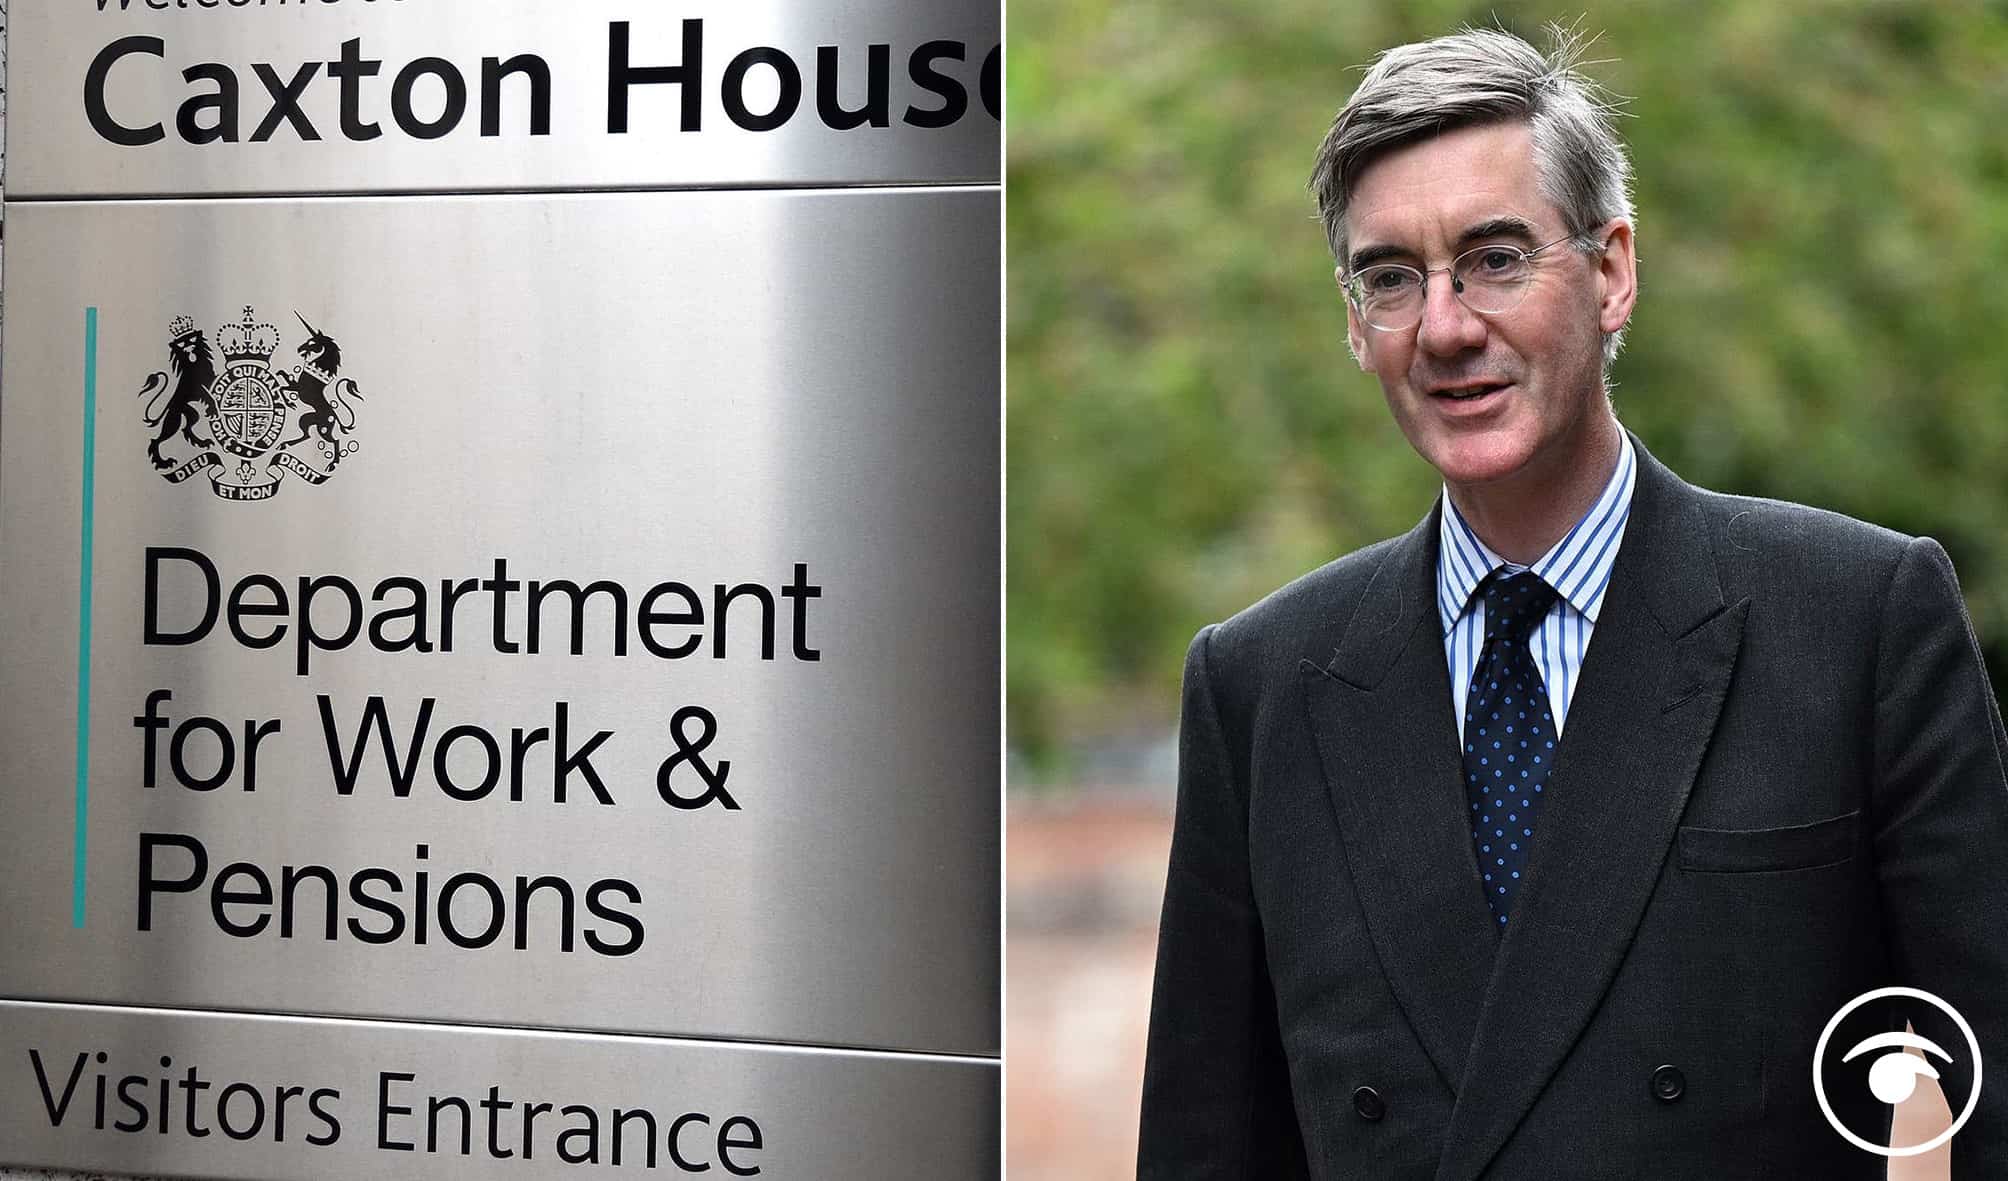 Mogg claims Brexit is over and denies return to austerity as govt cuts civil service jobs